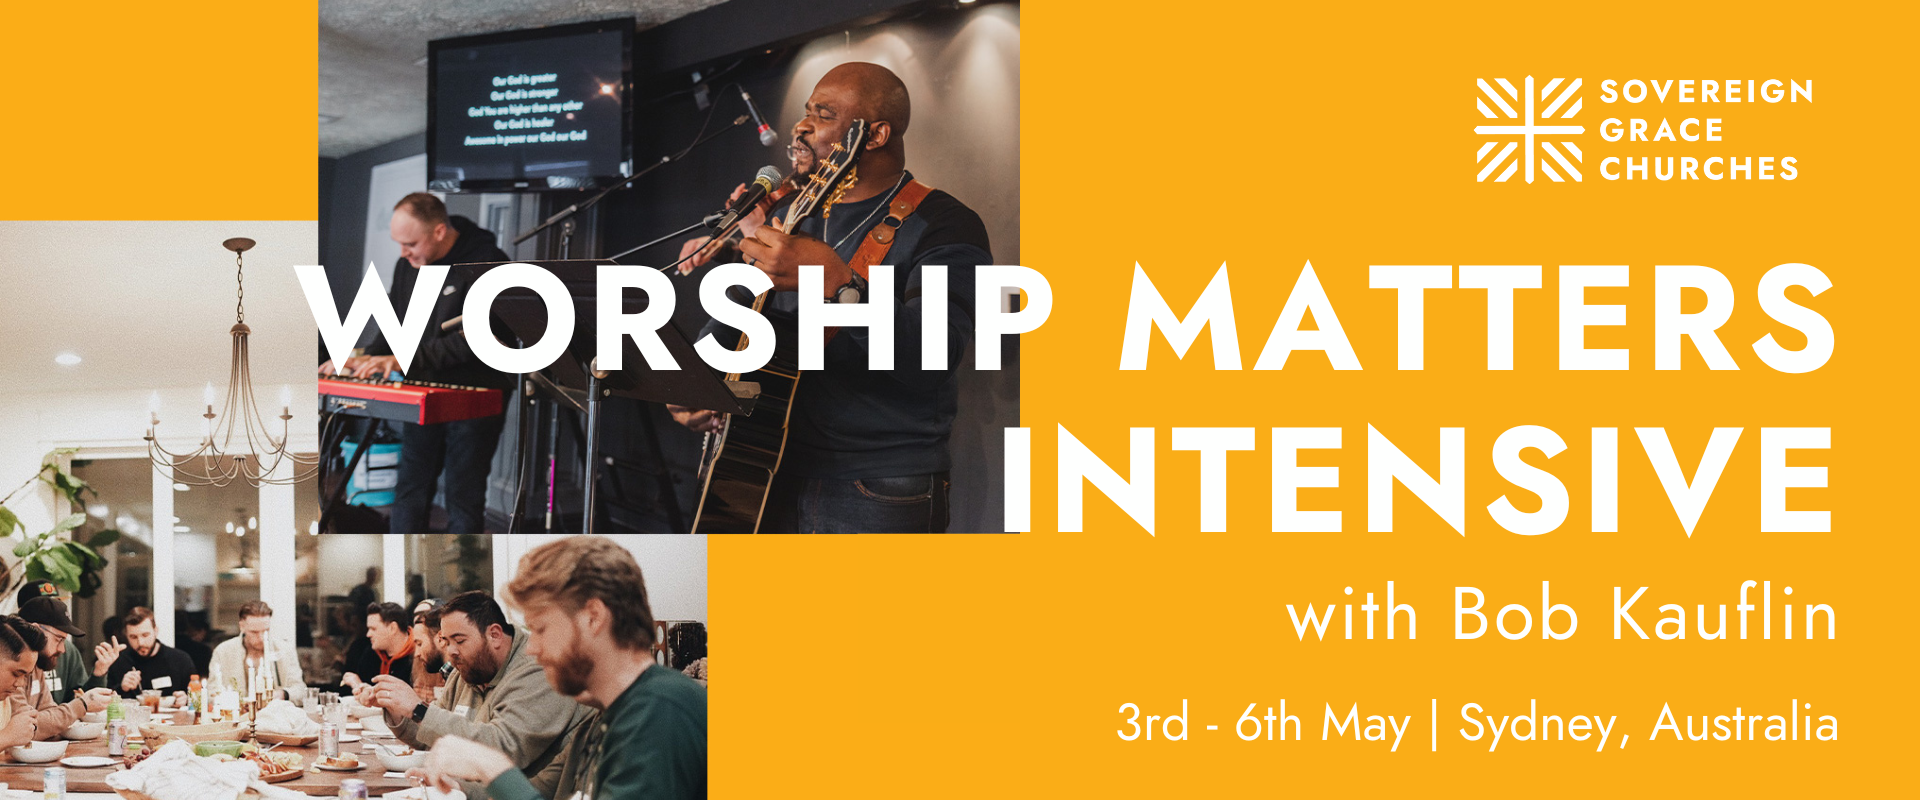 Worship+Matters+Intensive+with+Bob+Kauflin+(1920+×+800+px)+(2).png